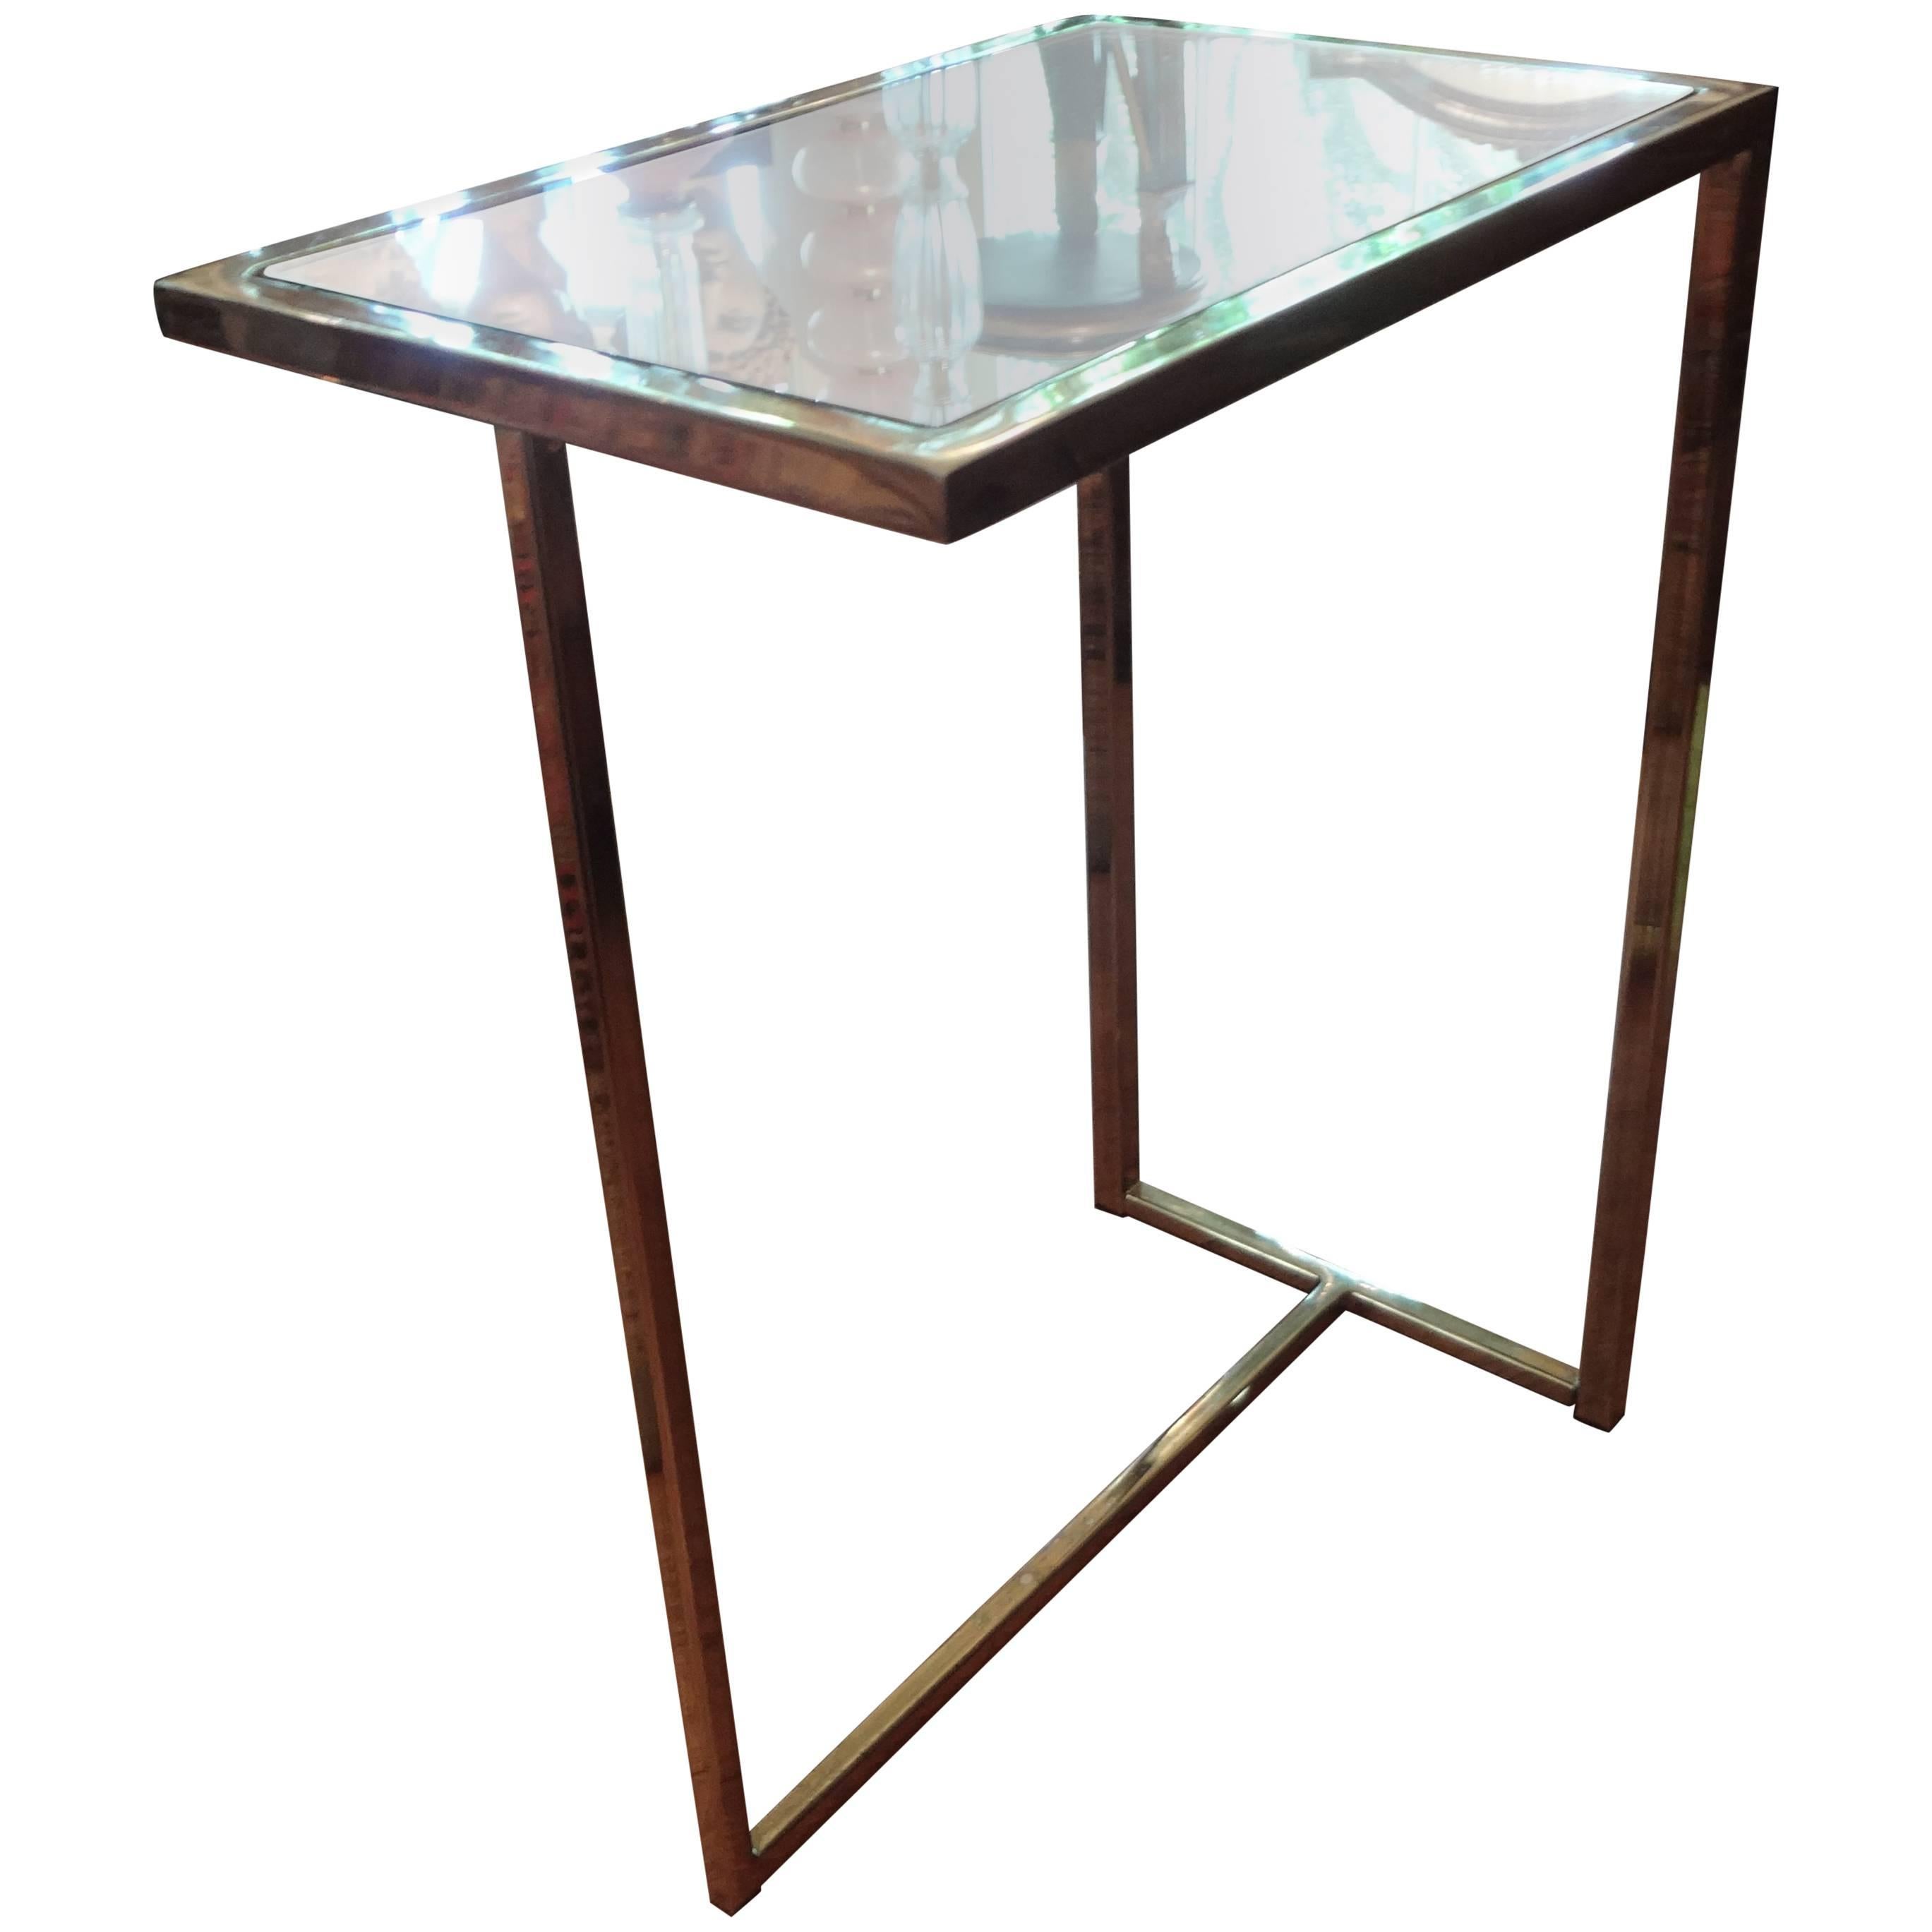 Mid-Century Modern Brass Table with Mirrored Top